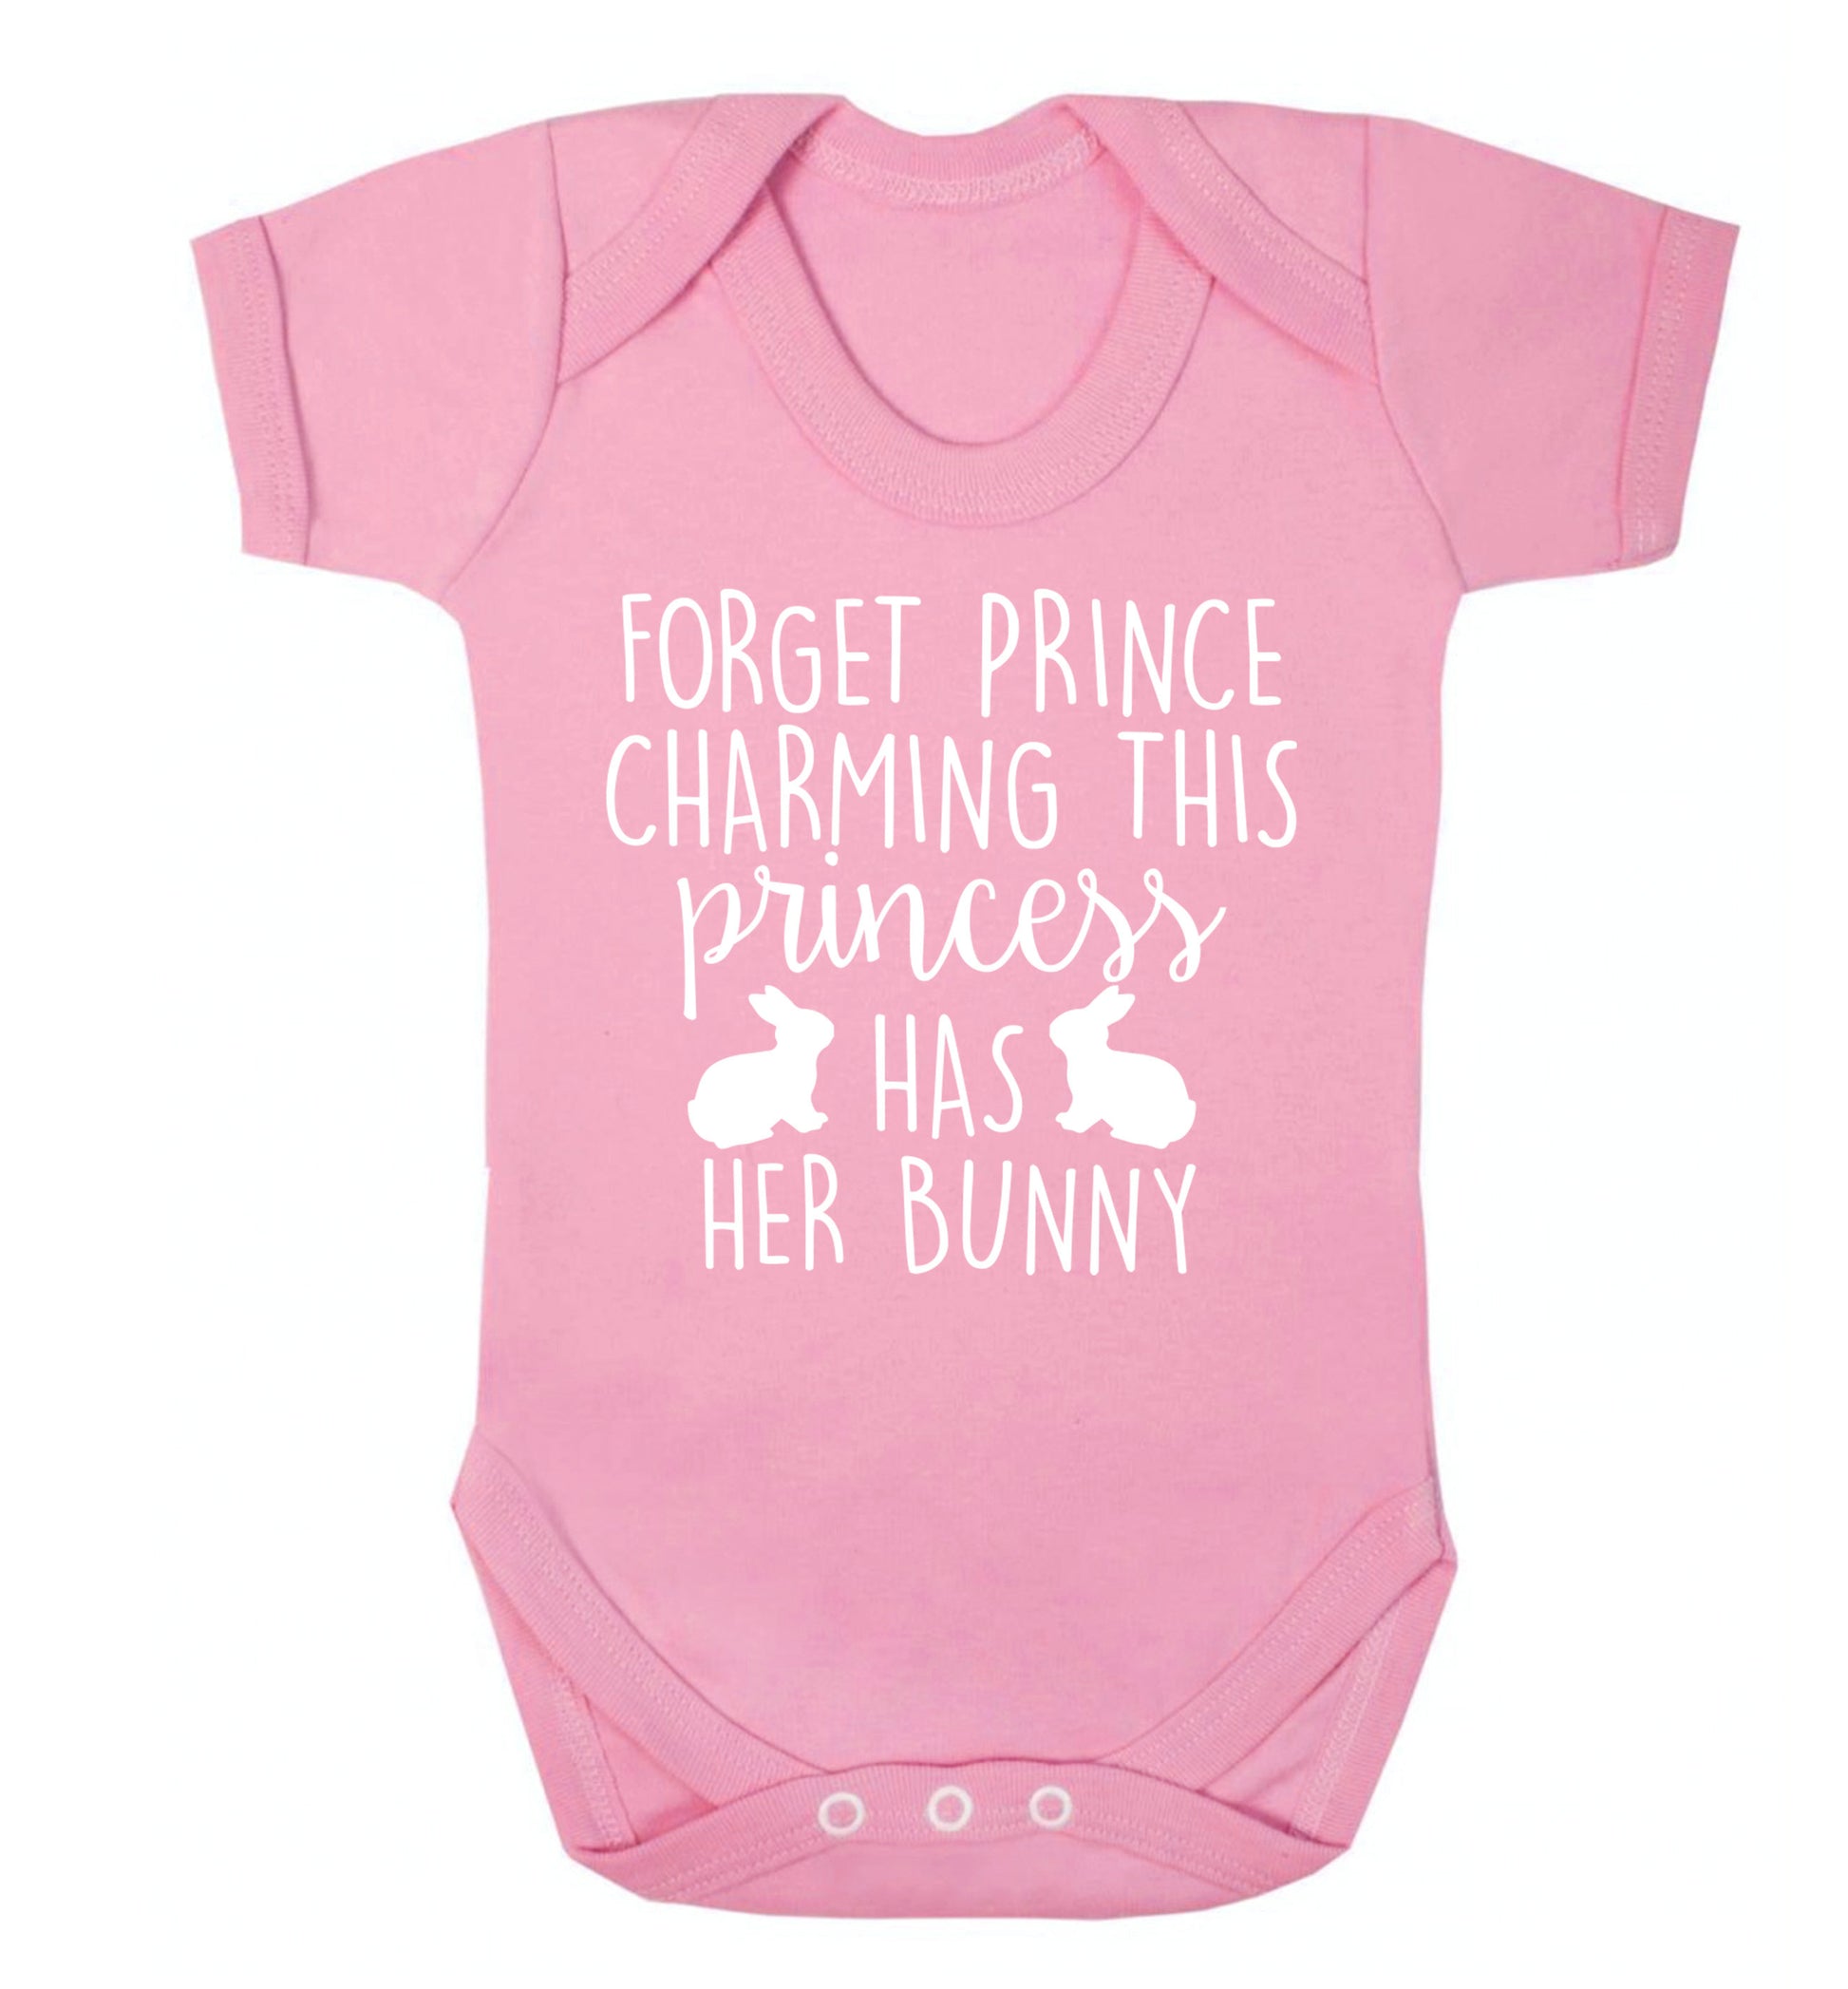 Forget prince charming this princess has her bunny Baby Vest pale pink 18-24 months